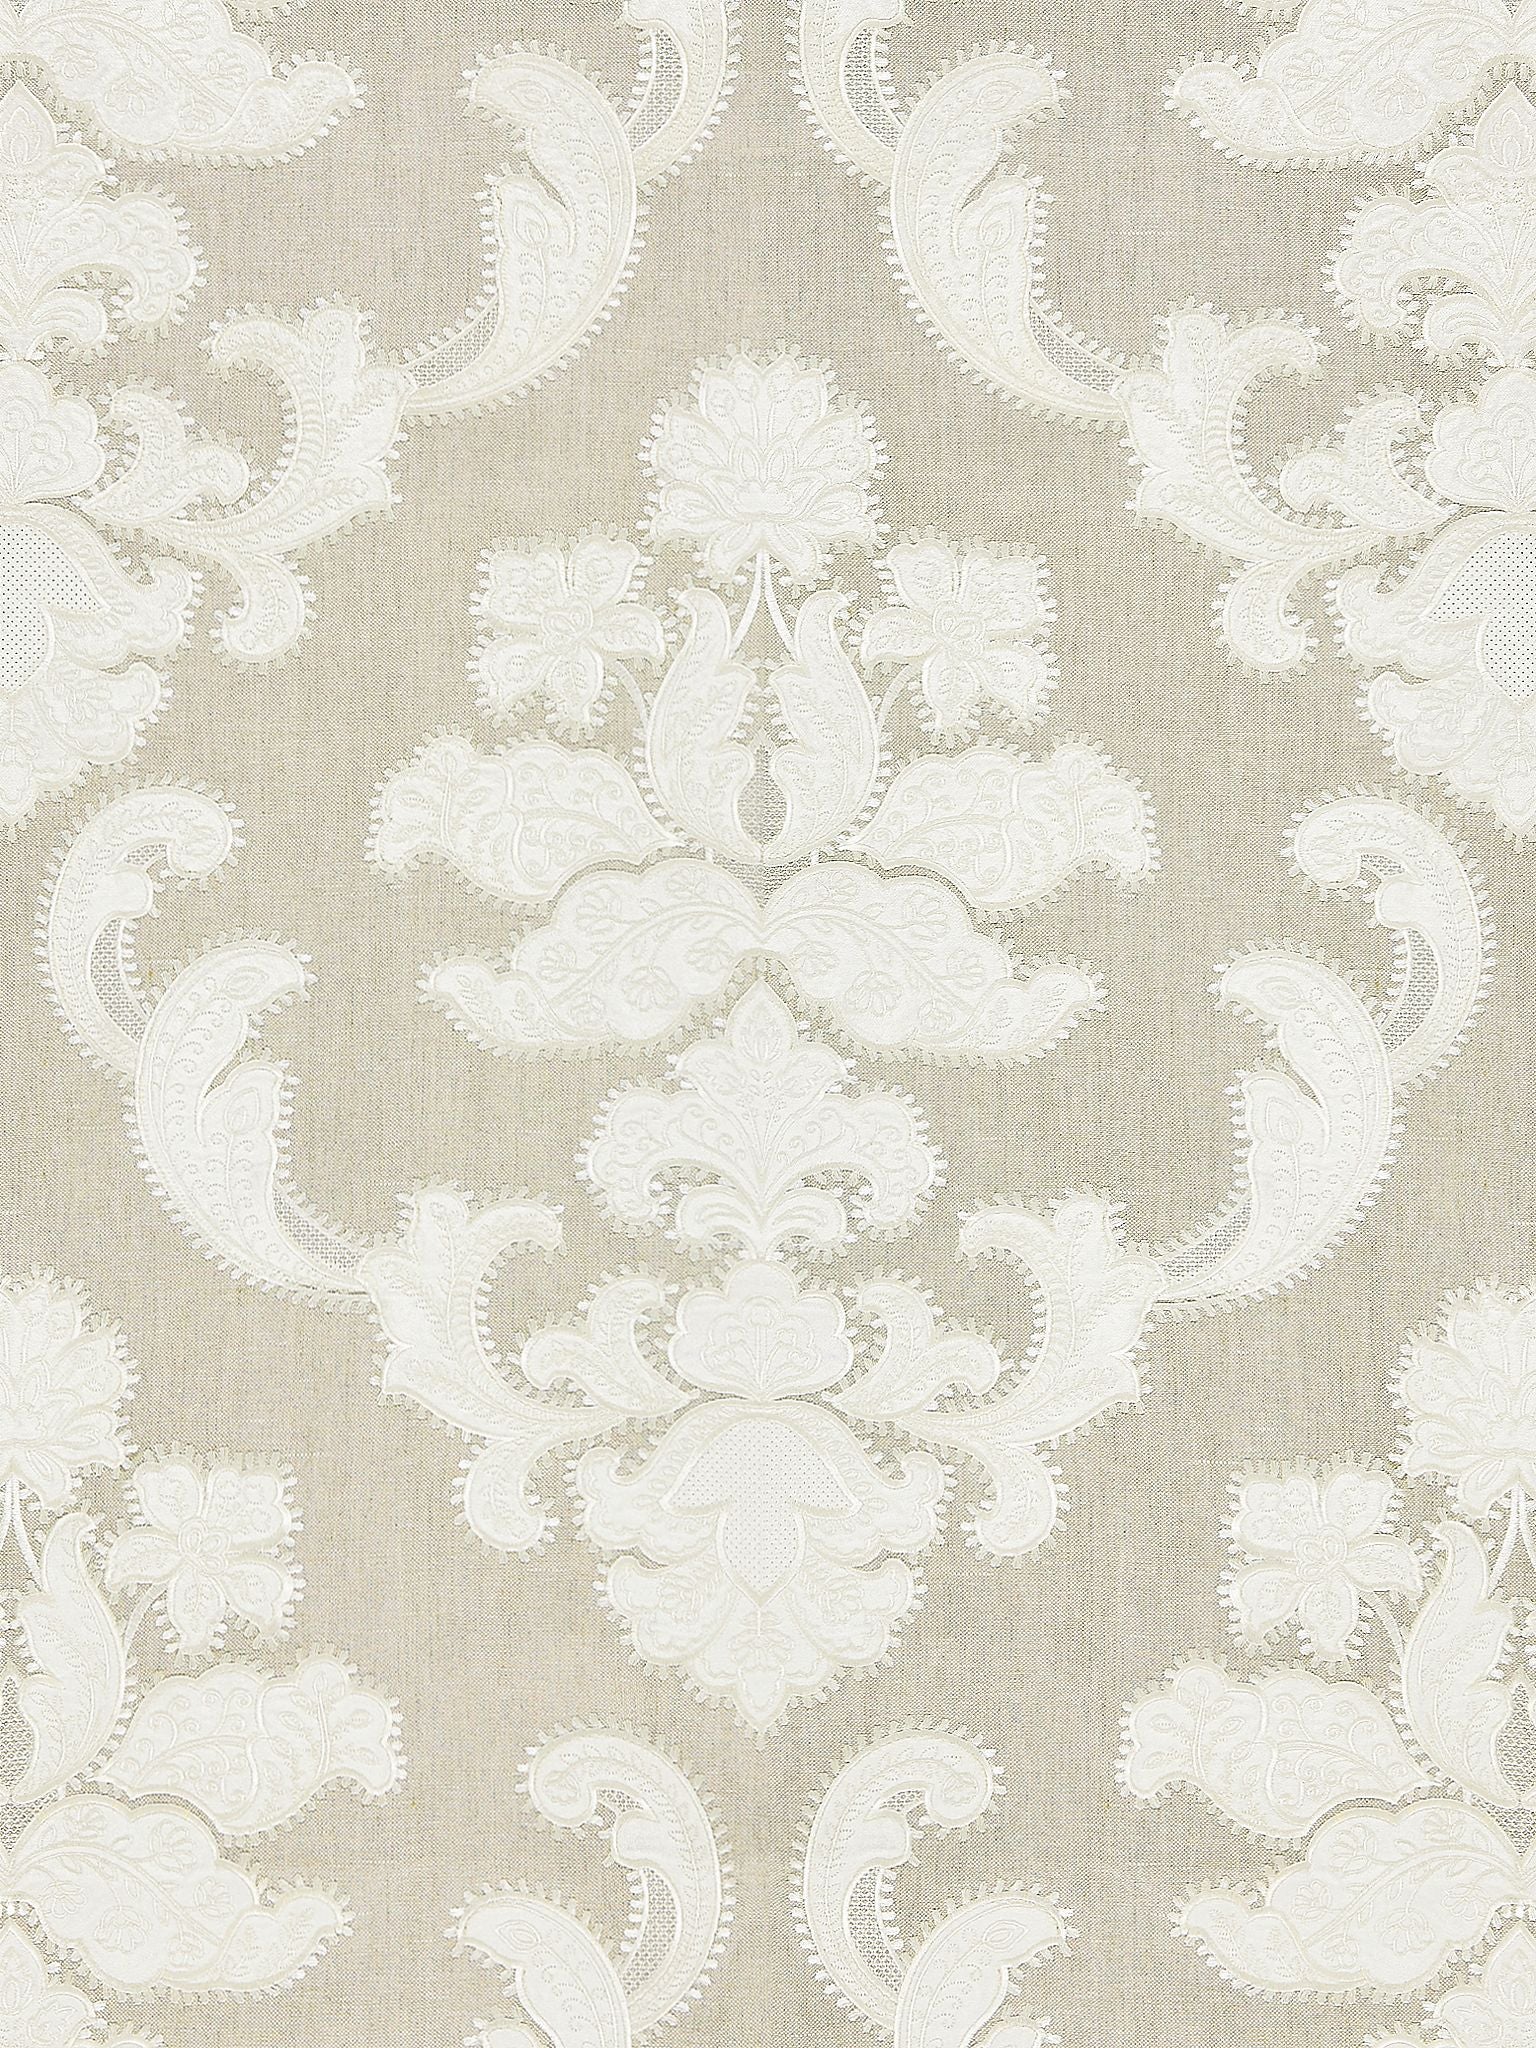 Cornelia Damask Embroidery fabric in flax color - pattern number SC 000227160 - by Scalamandre in the Scalamandre Fabrics Book 1 collection